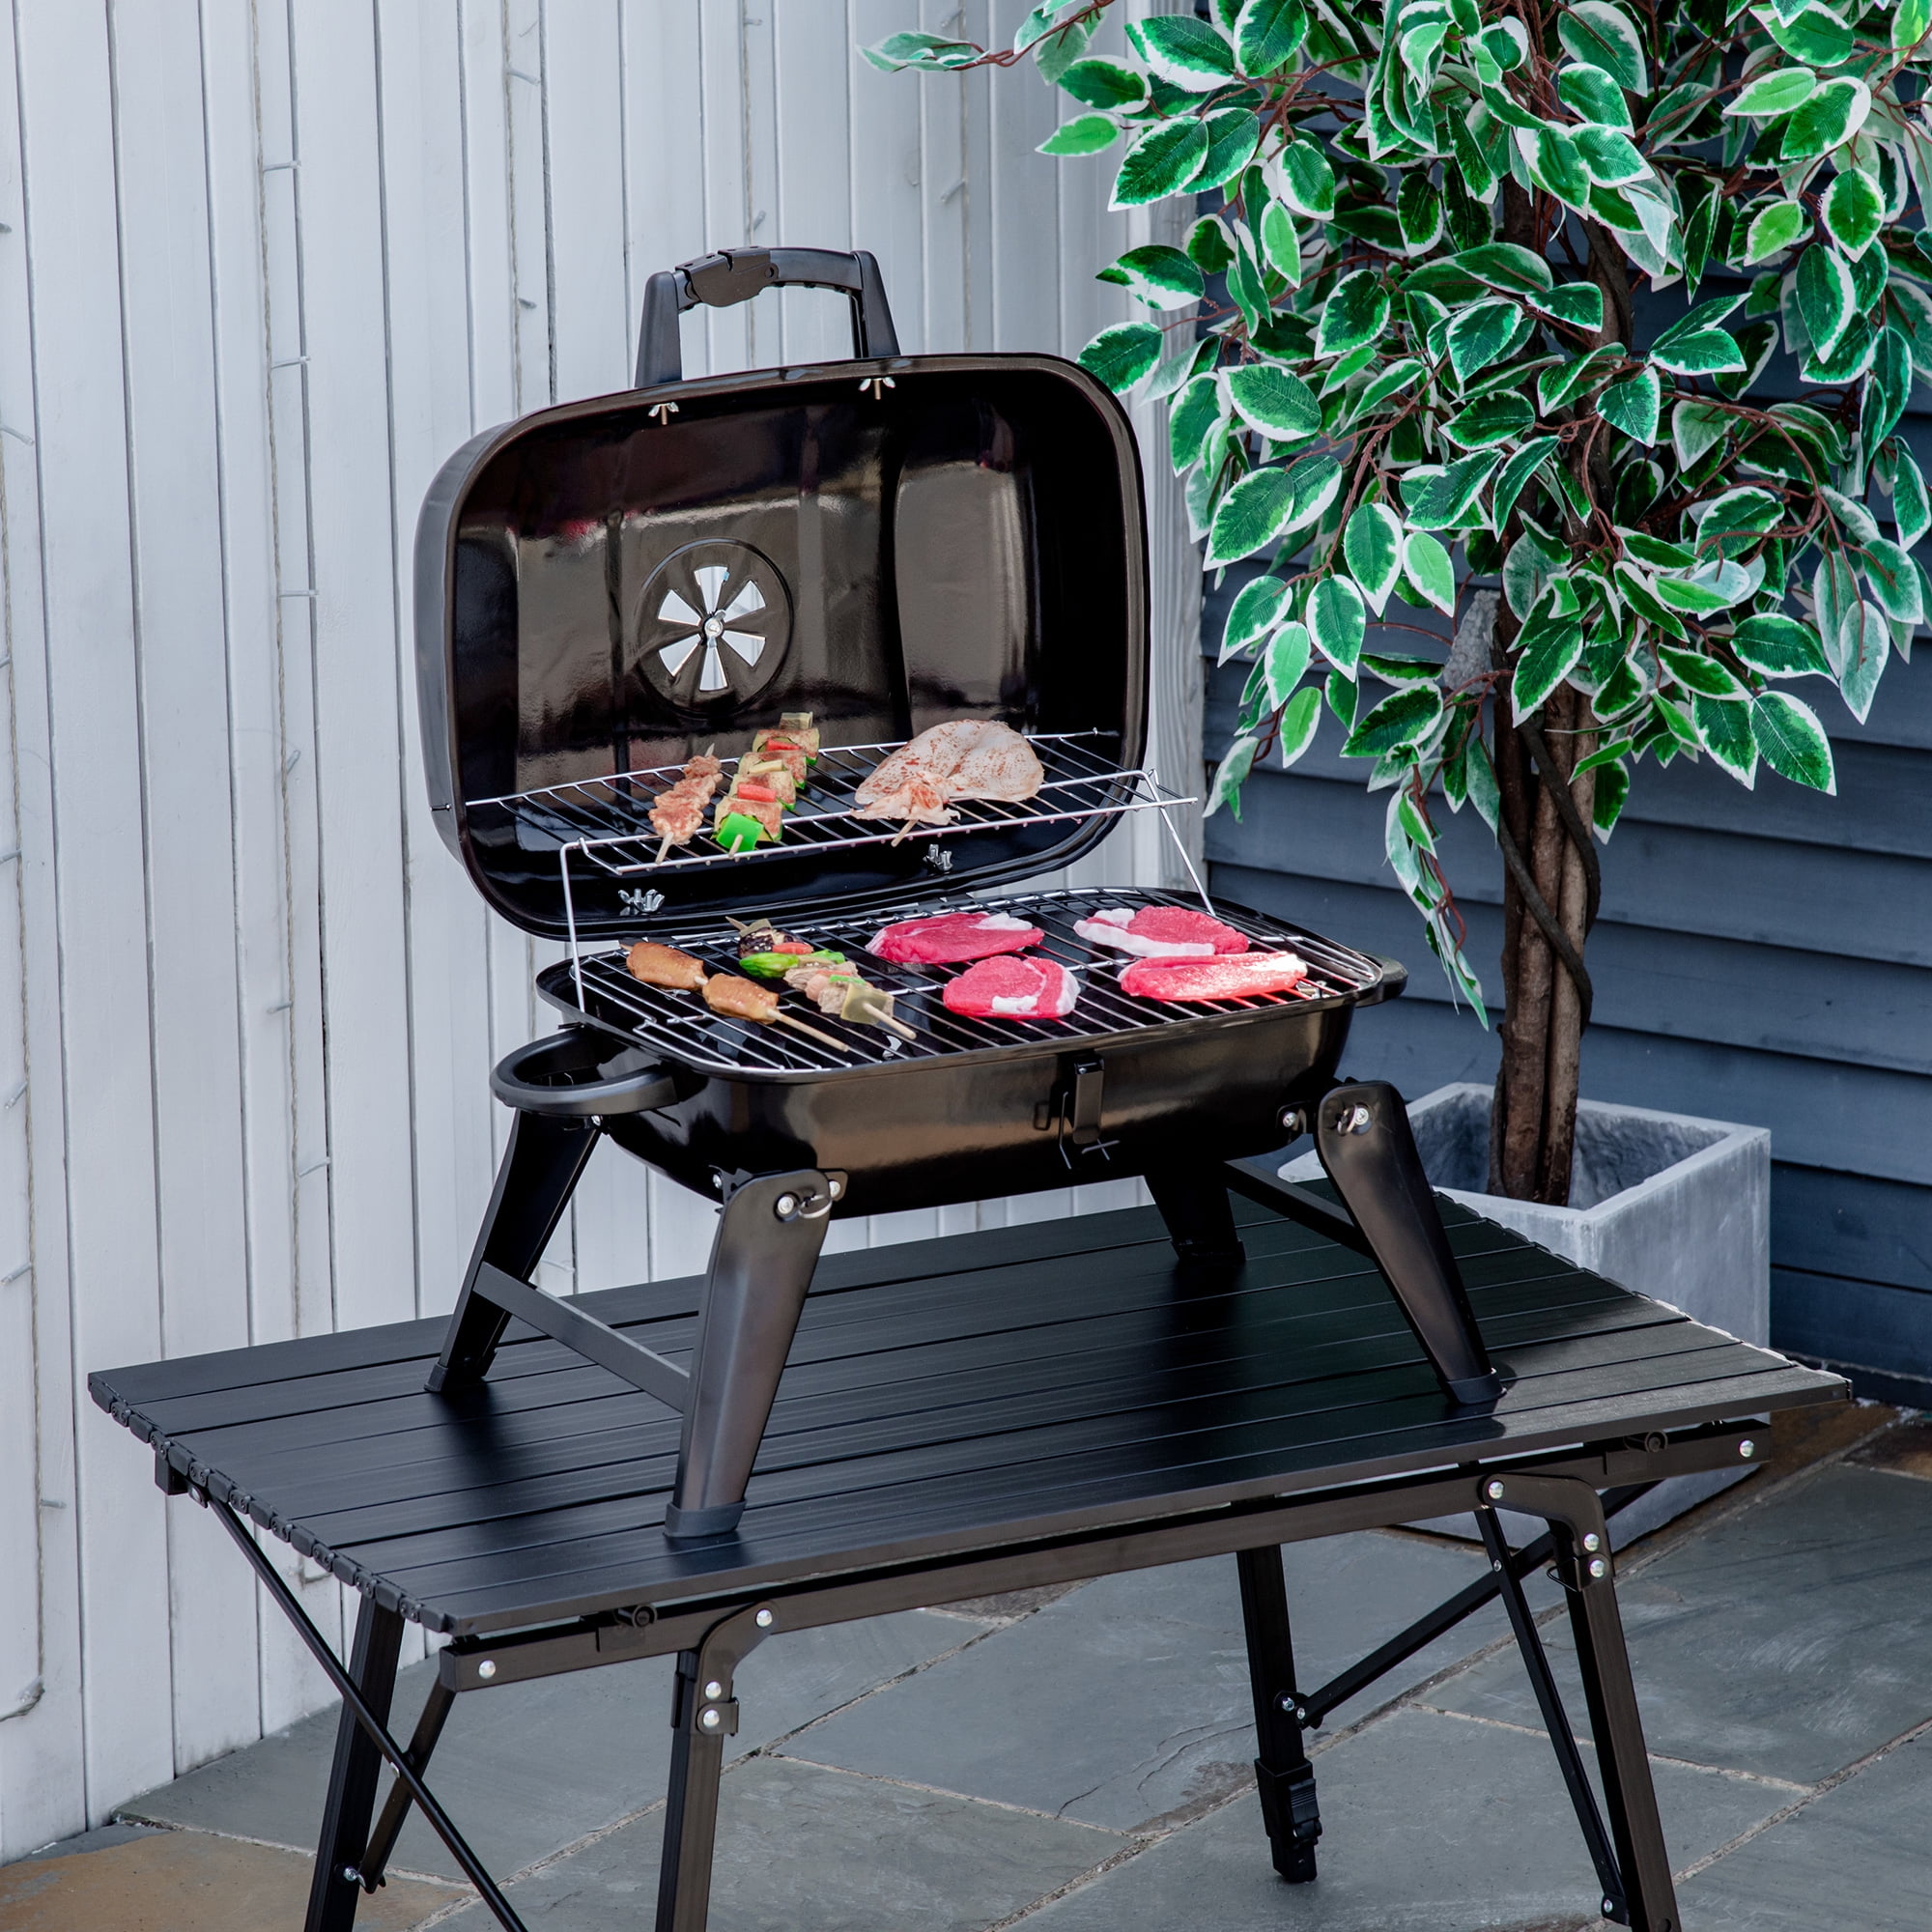 1pc, Charcoal Grill, Portable Charcoal Grill, Barbecue Grill, Small  Charcoal Grill For Backyard, Camping, Suitable For Oven Barbecue, Home, RV,  BBQ Ac